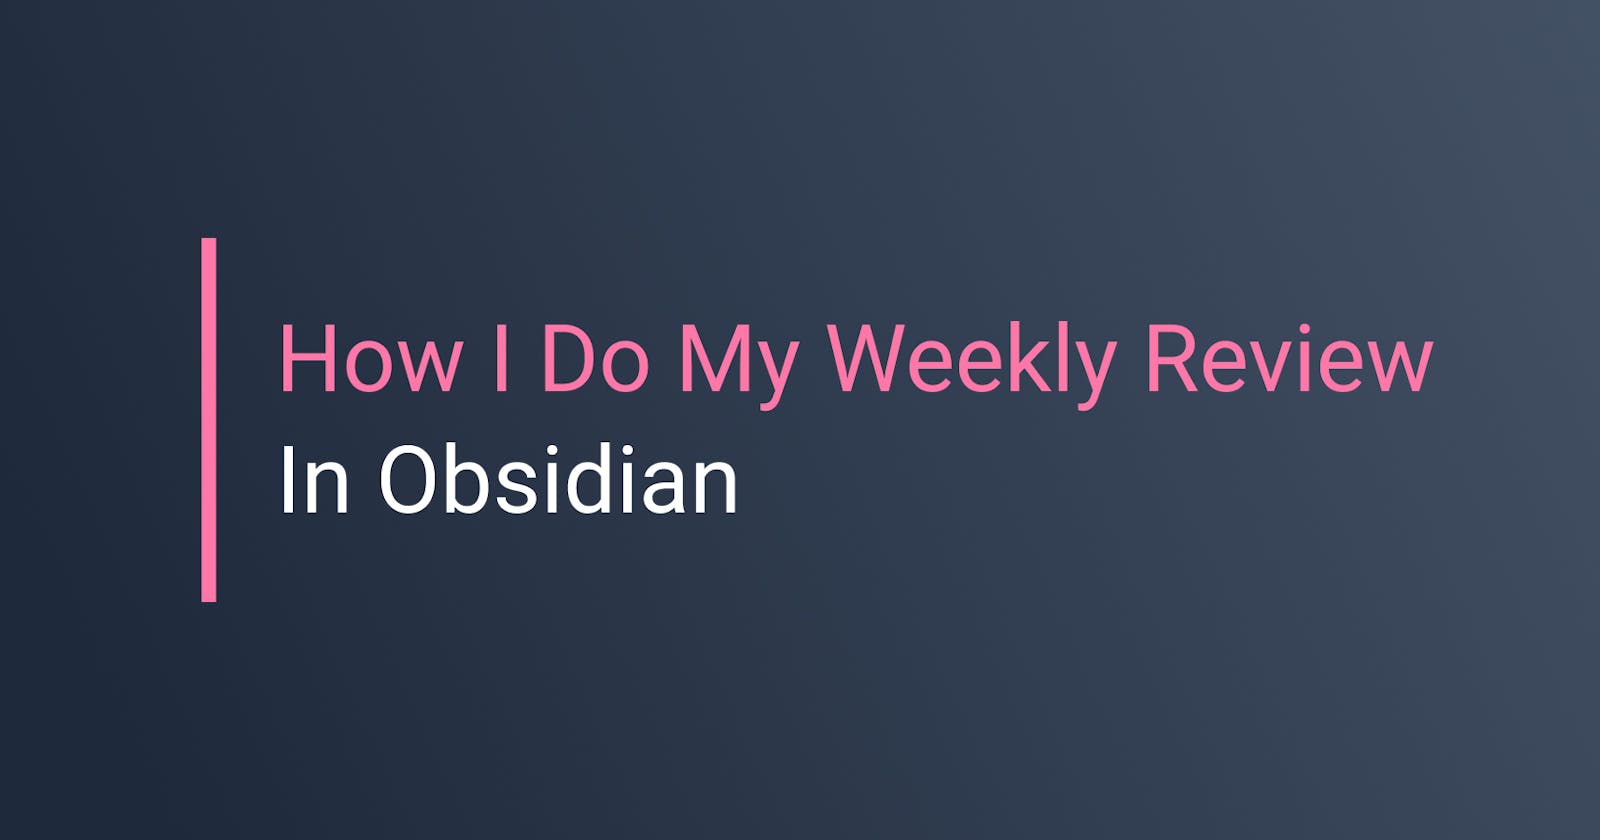 How I Do My Weekly Review In Obsidian